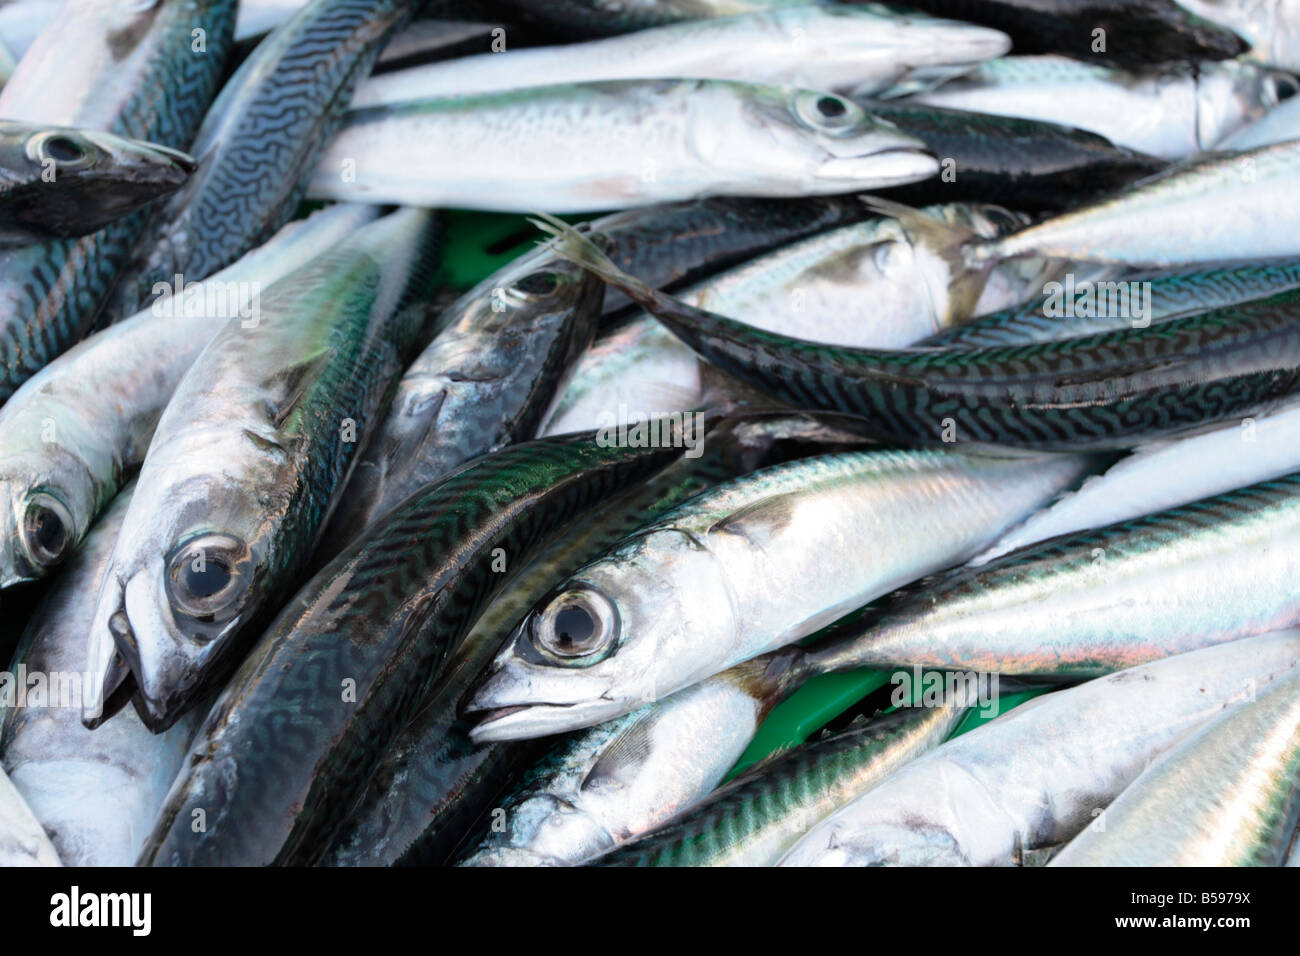 A crate of small mackrel ready to load into a refrigated van for transfer to market Playa San Juan Tenerife Canary Islands Spain Stock Photo